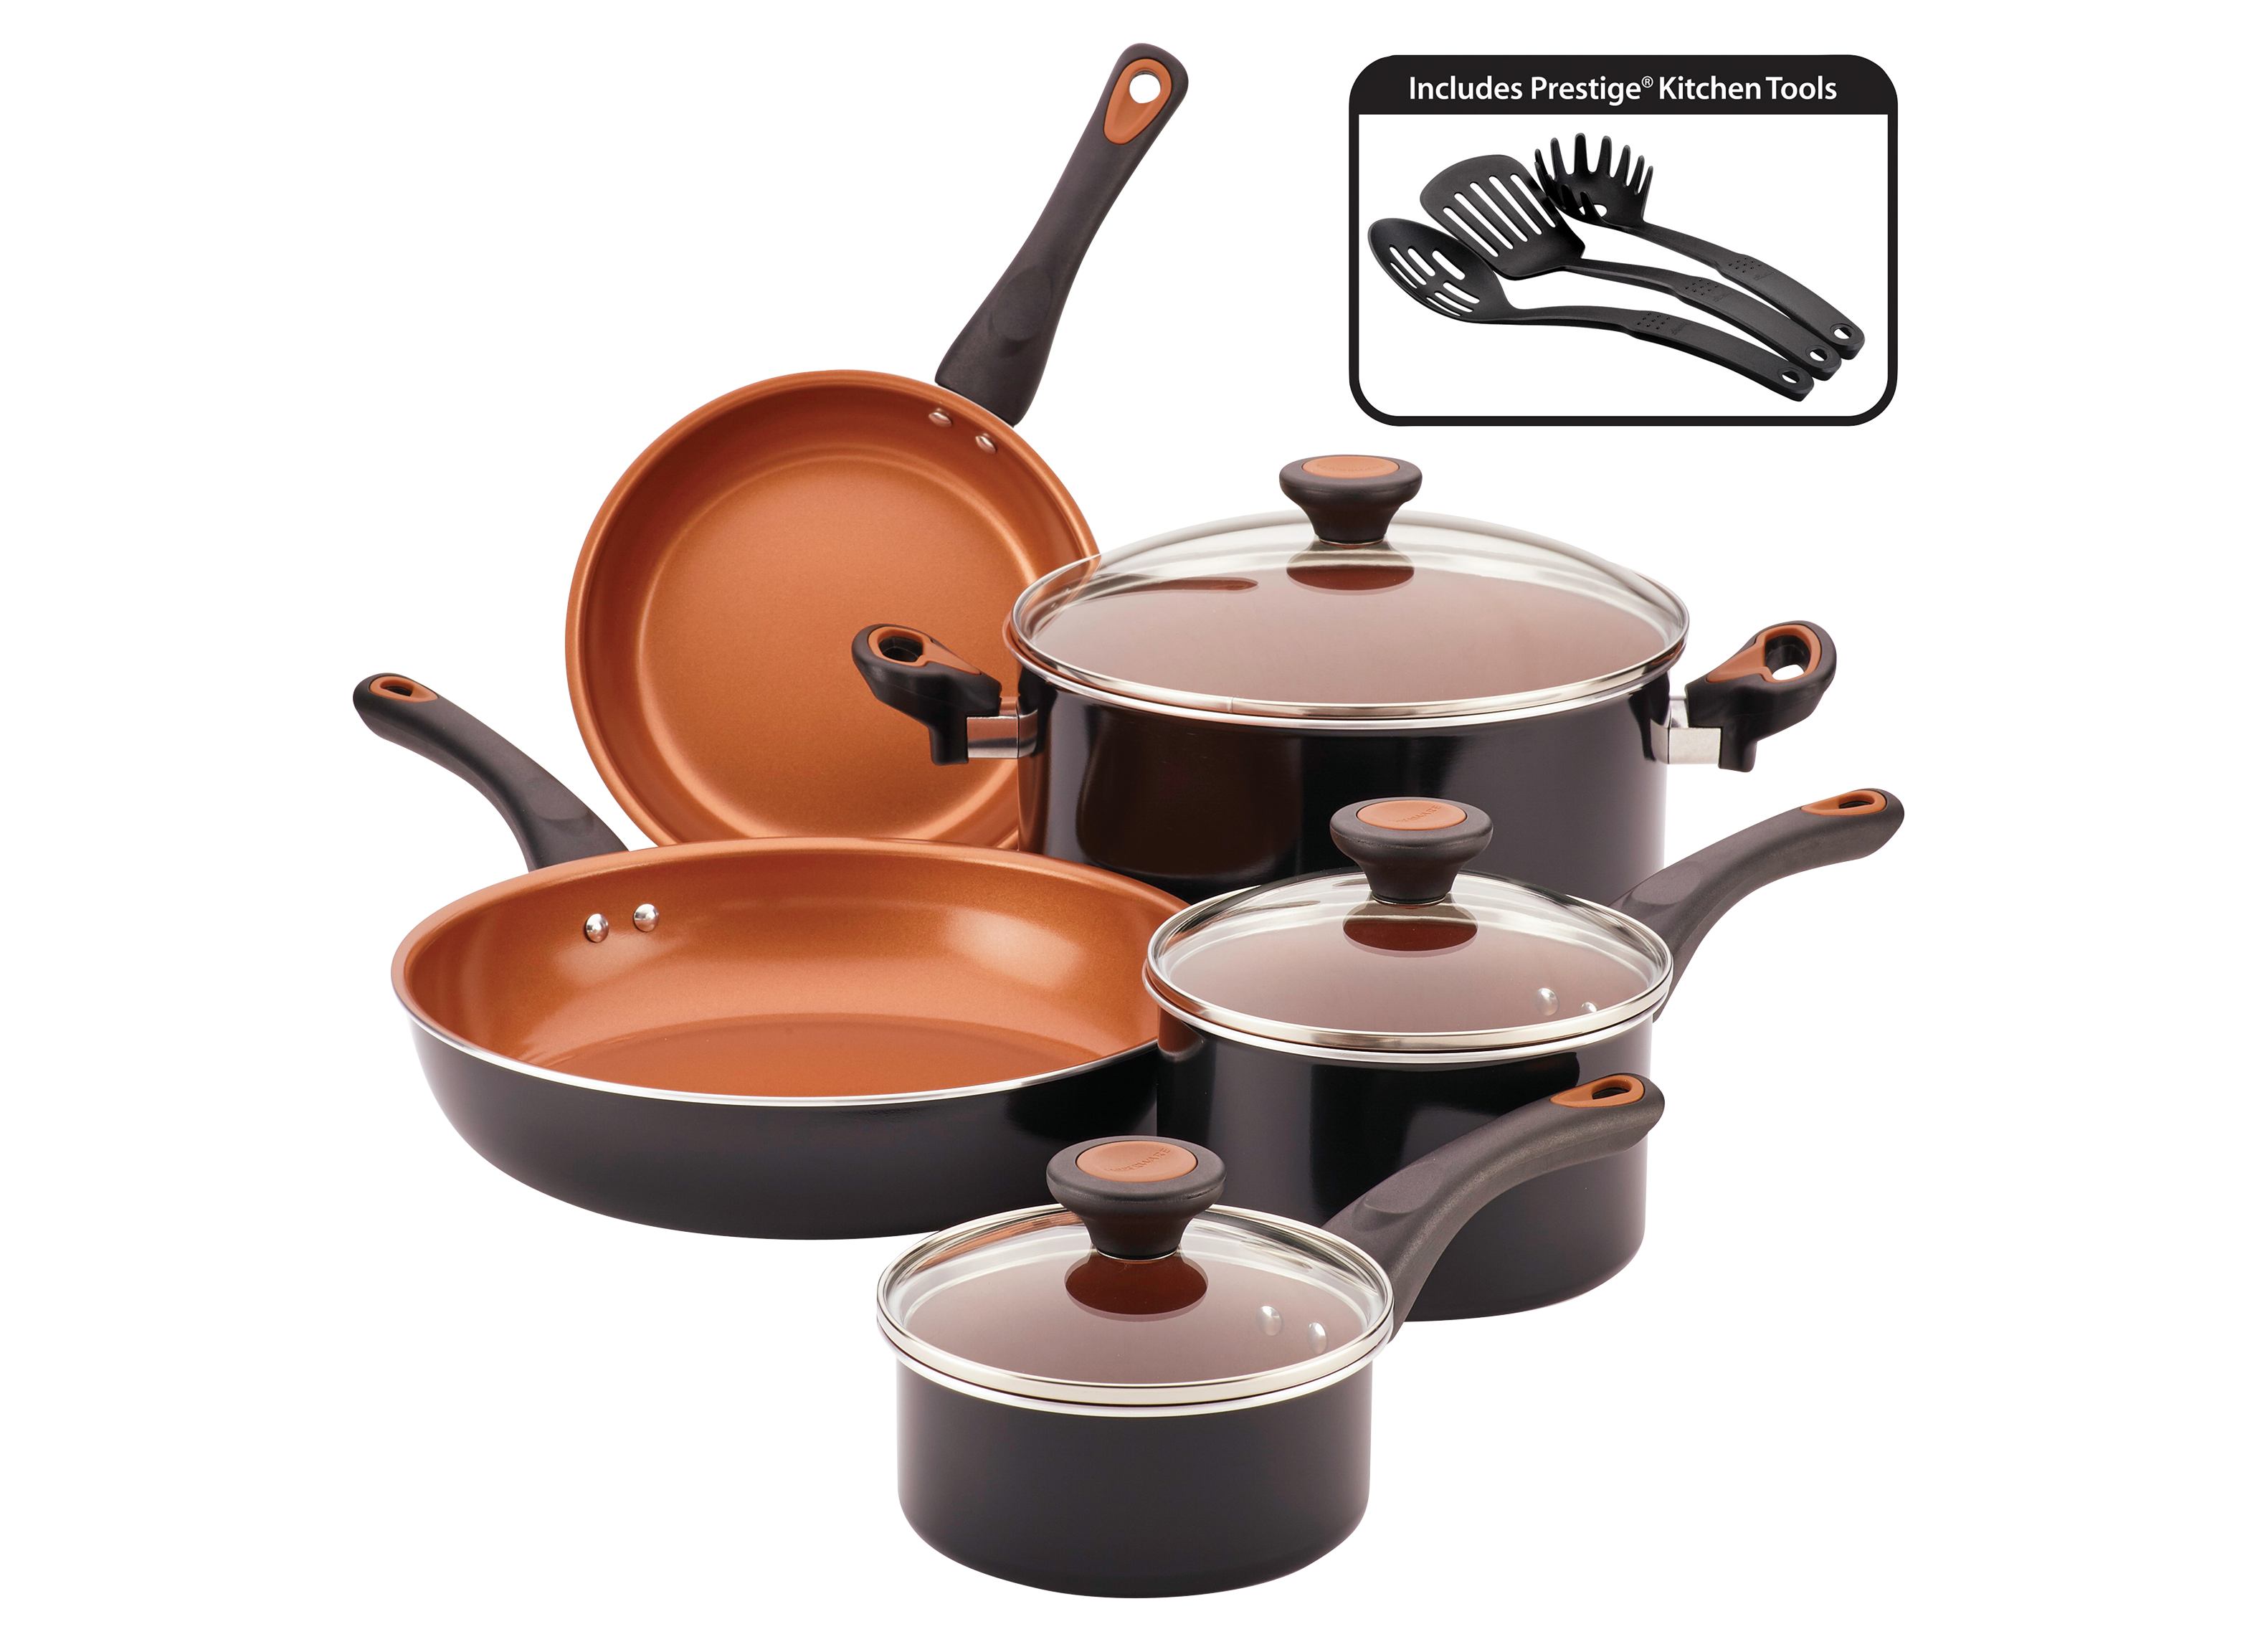 https://crdms.images.consumerreports.org/prod/products/cr/models/404685-cookware-sets-nonstick-farberware-glide-11pc-10027955.png